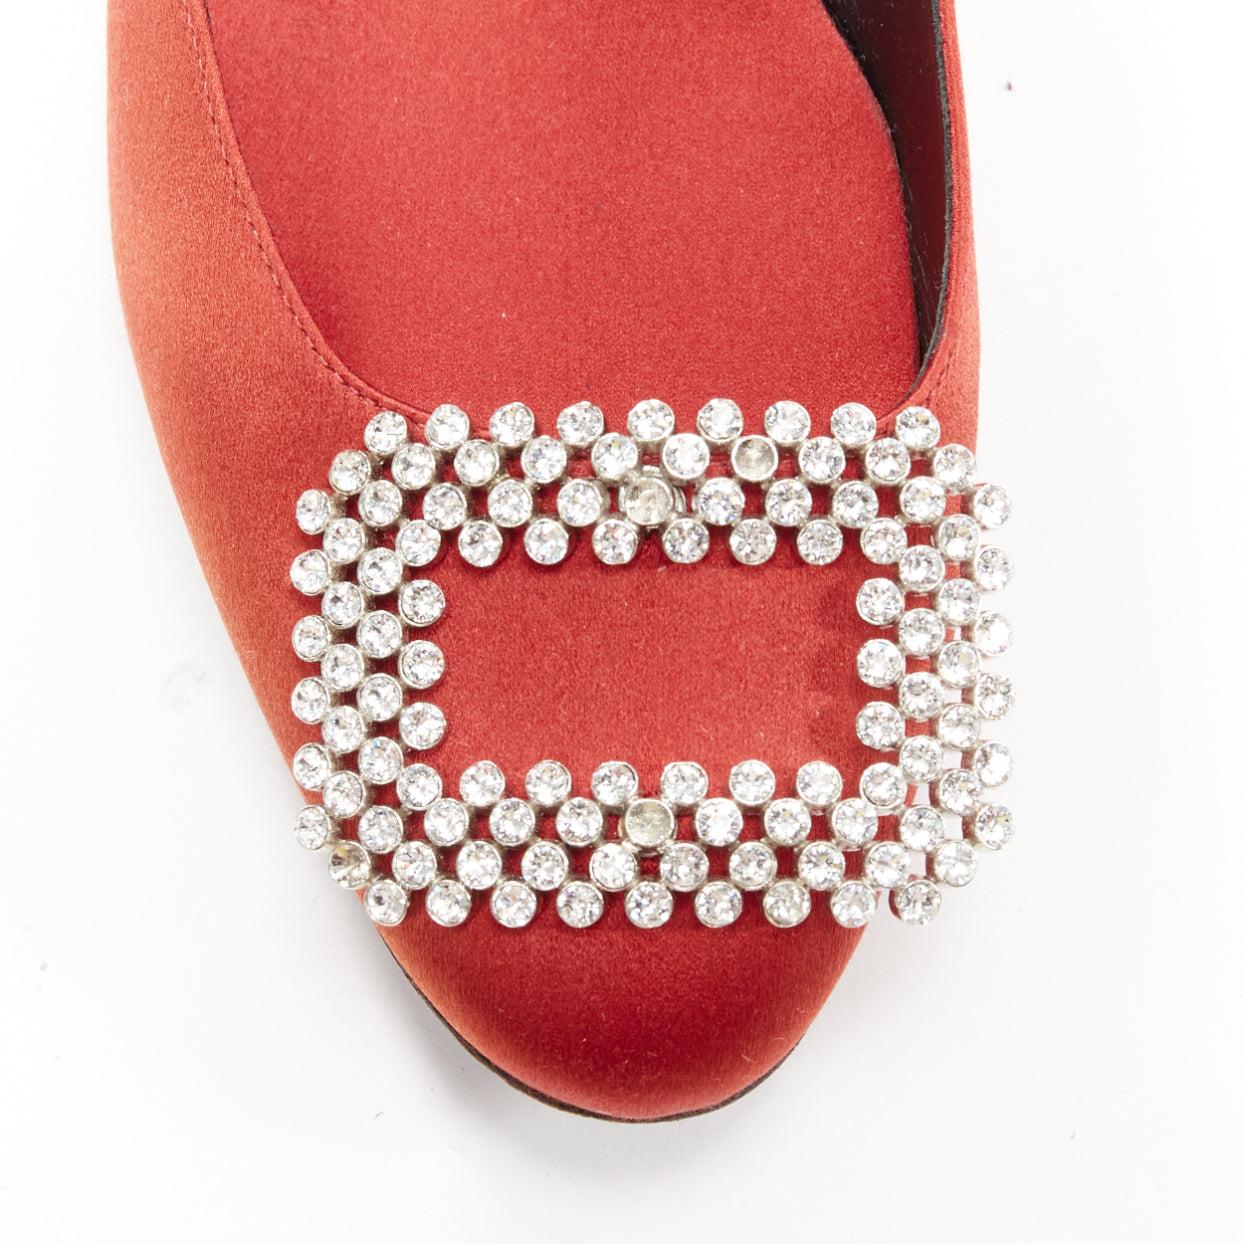 ROGER VIVIER red satin silver strass crystal buckle classic dress flats EU36.5 For Sale 3